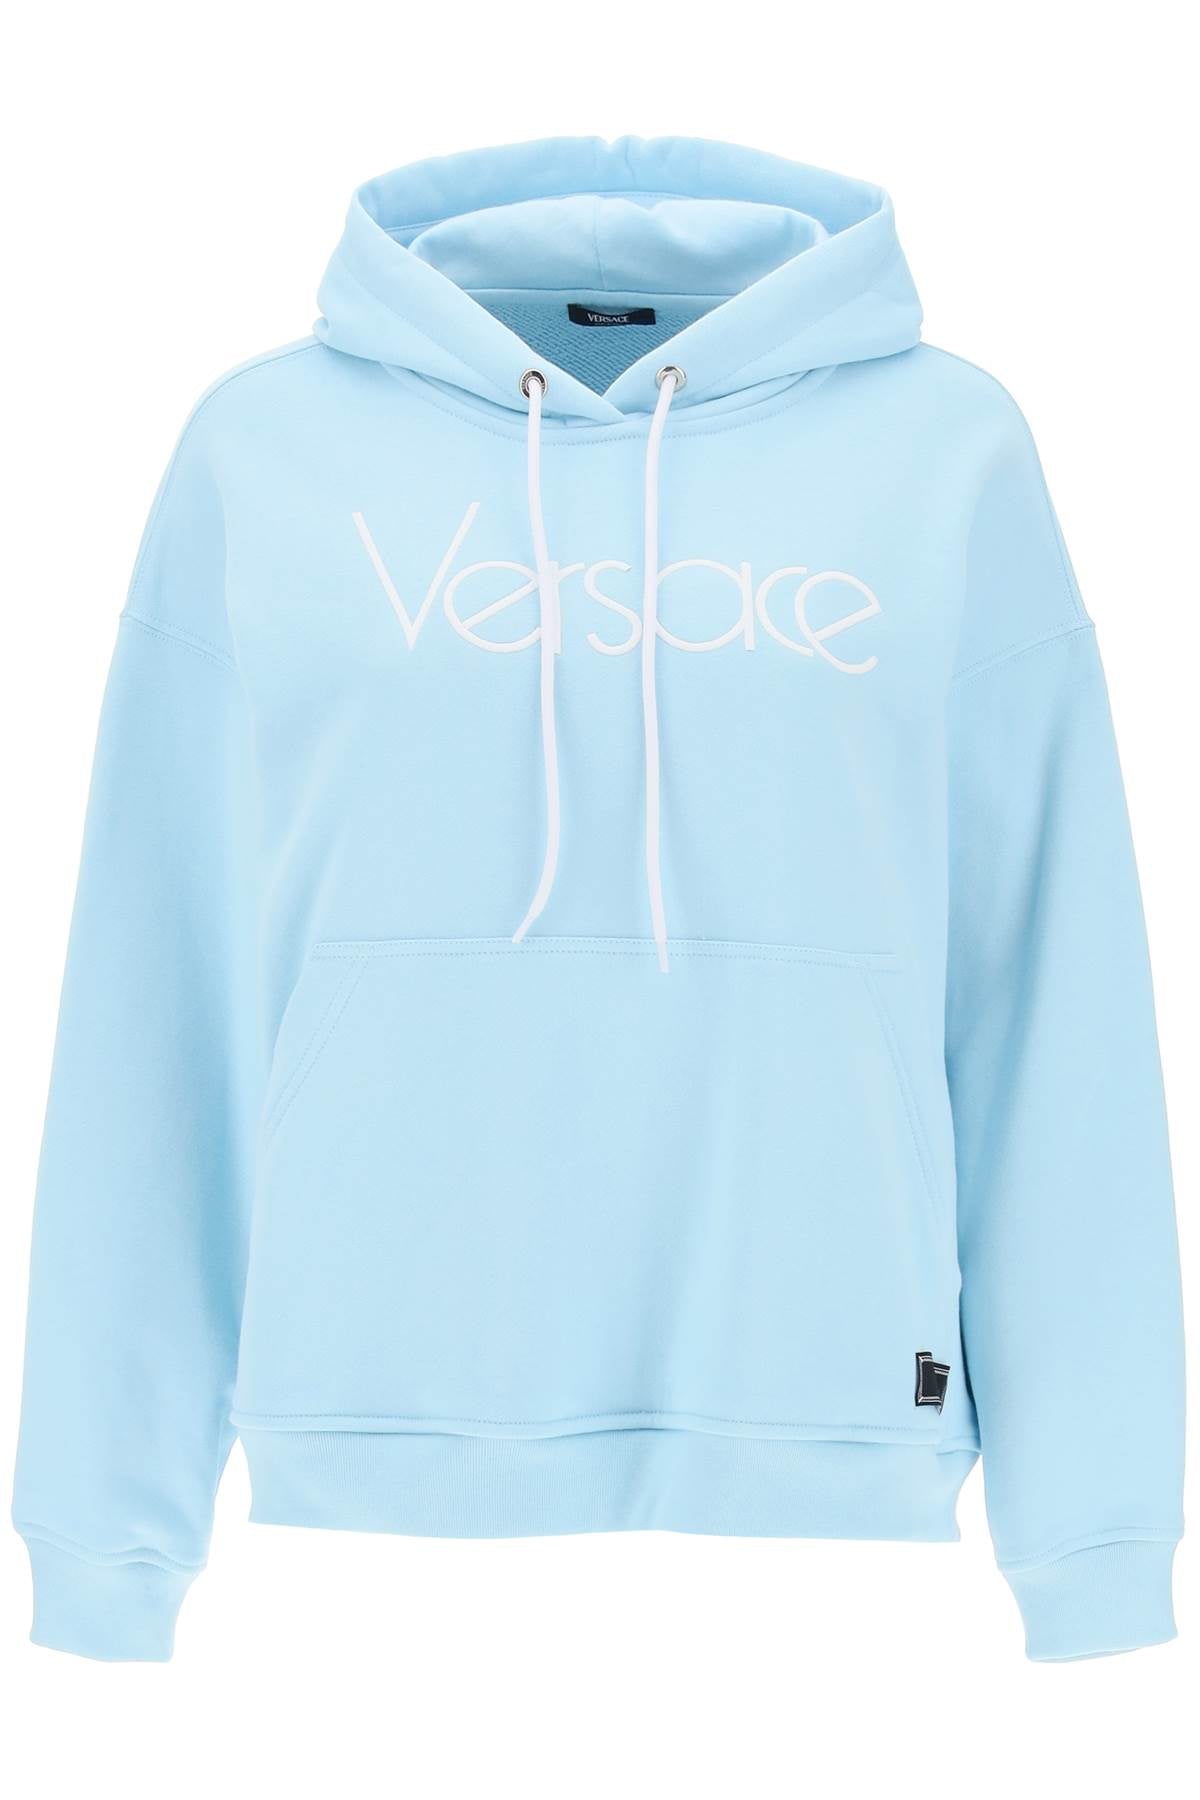 Archive 1978 Re-Edition Logo Hoodie for Women in Light Blue